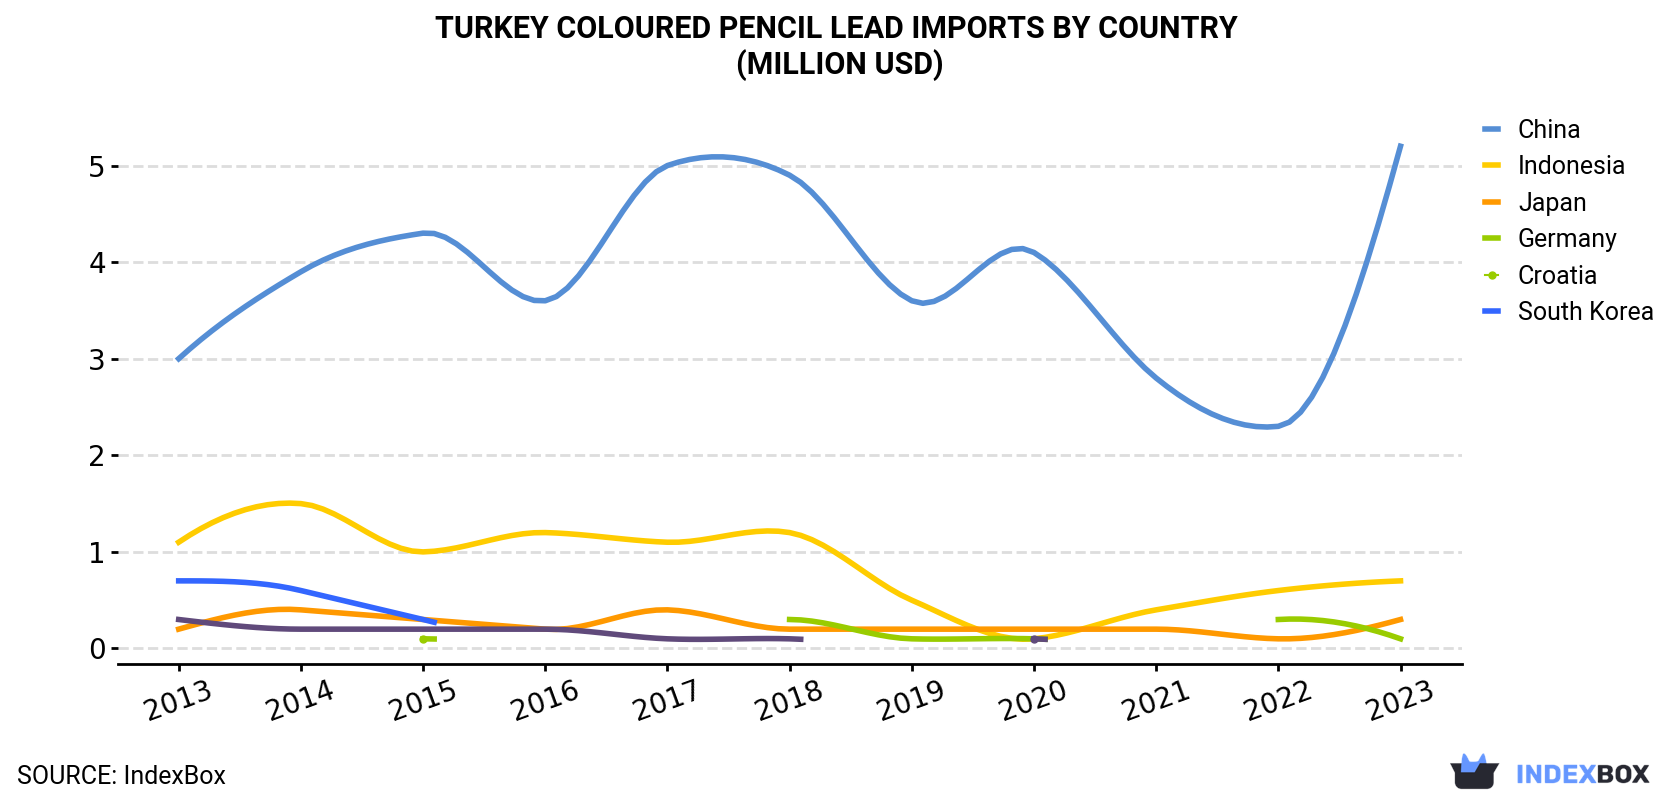 Turkey Coloured Pencil Lead Imports By Country (Million USD)